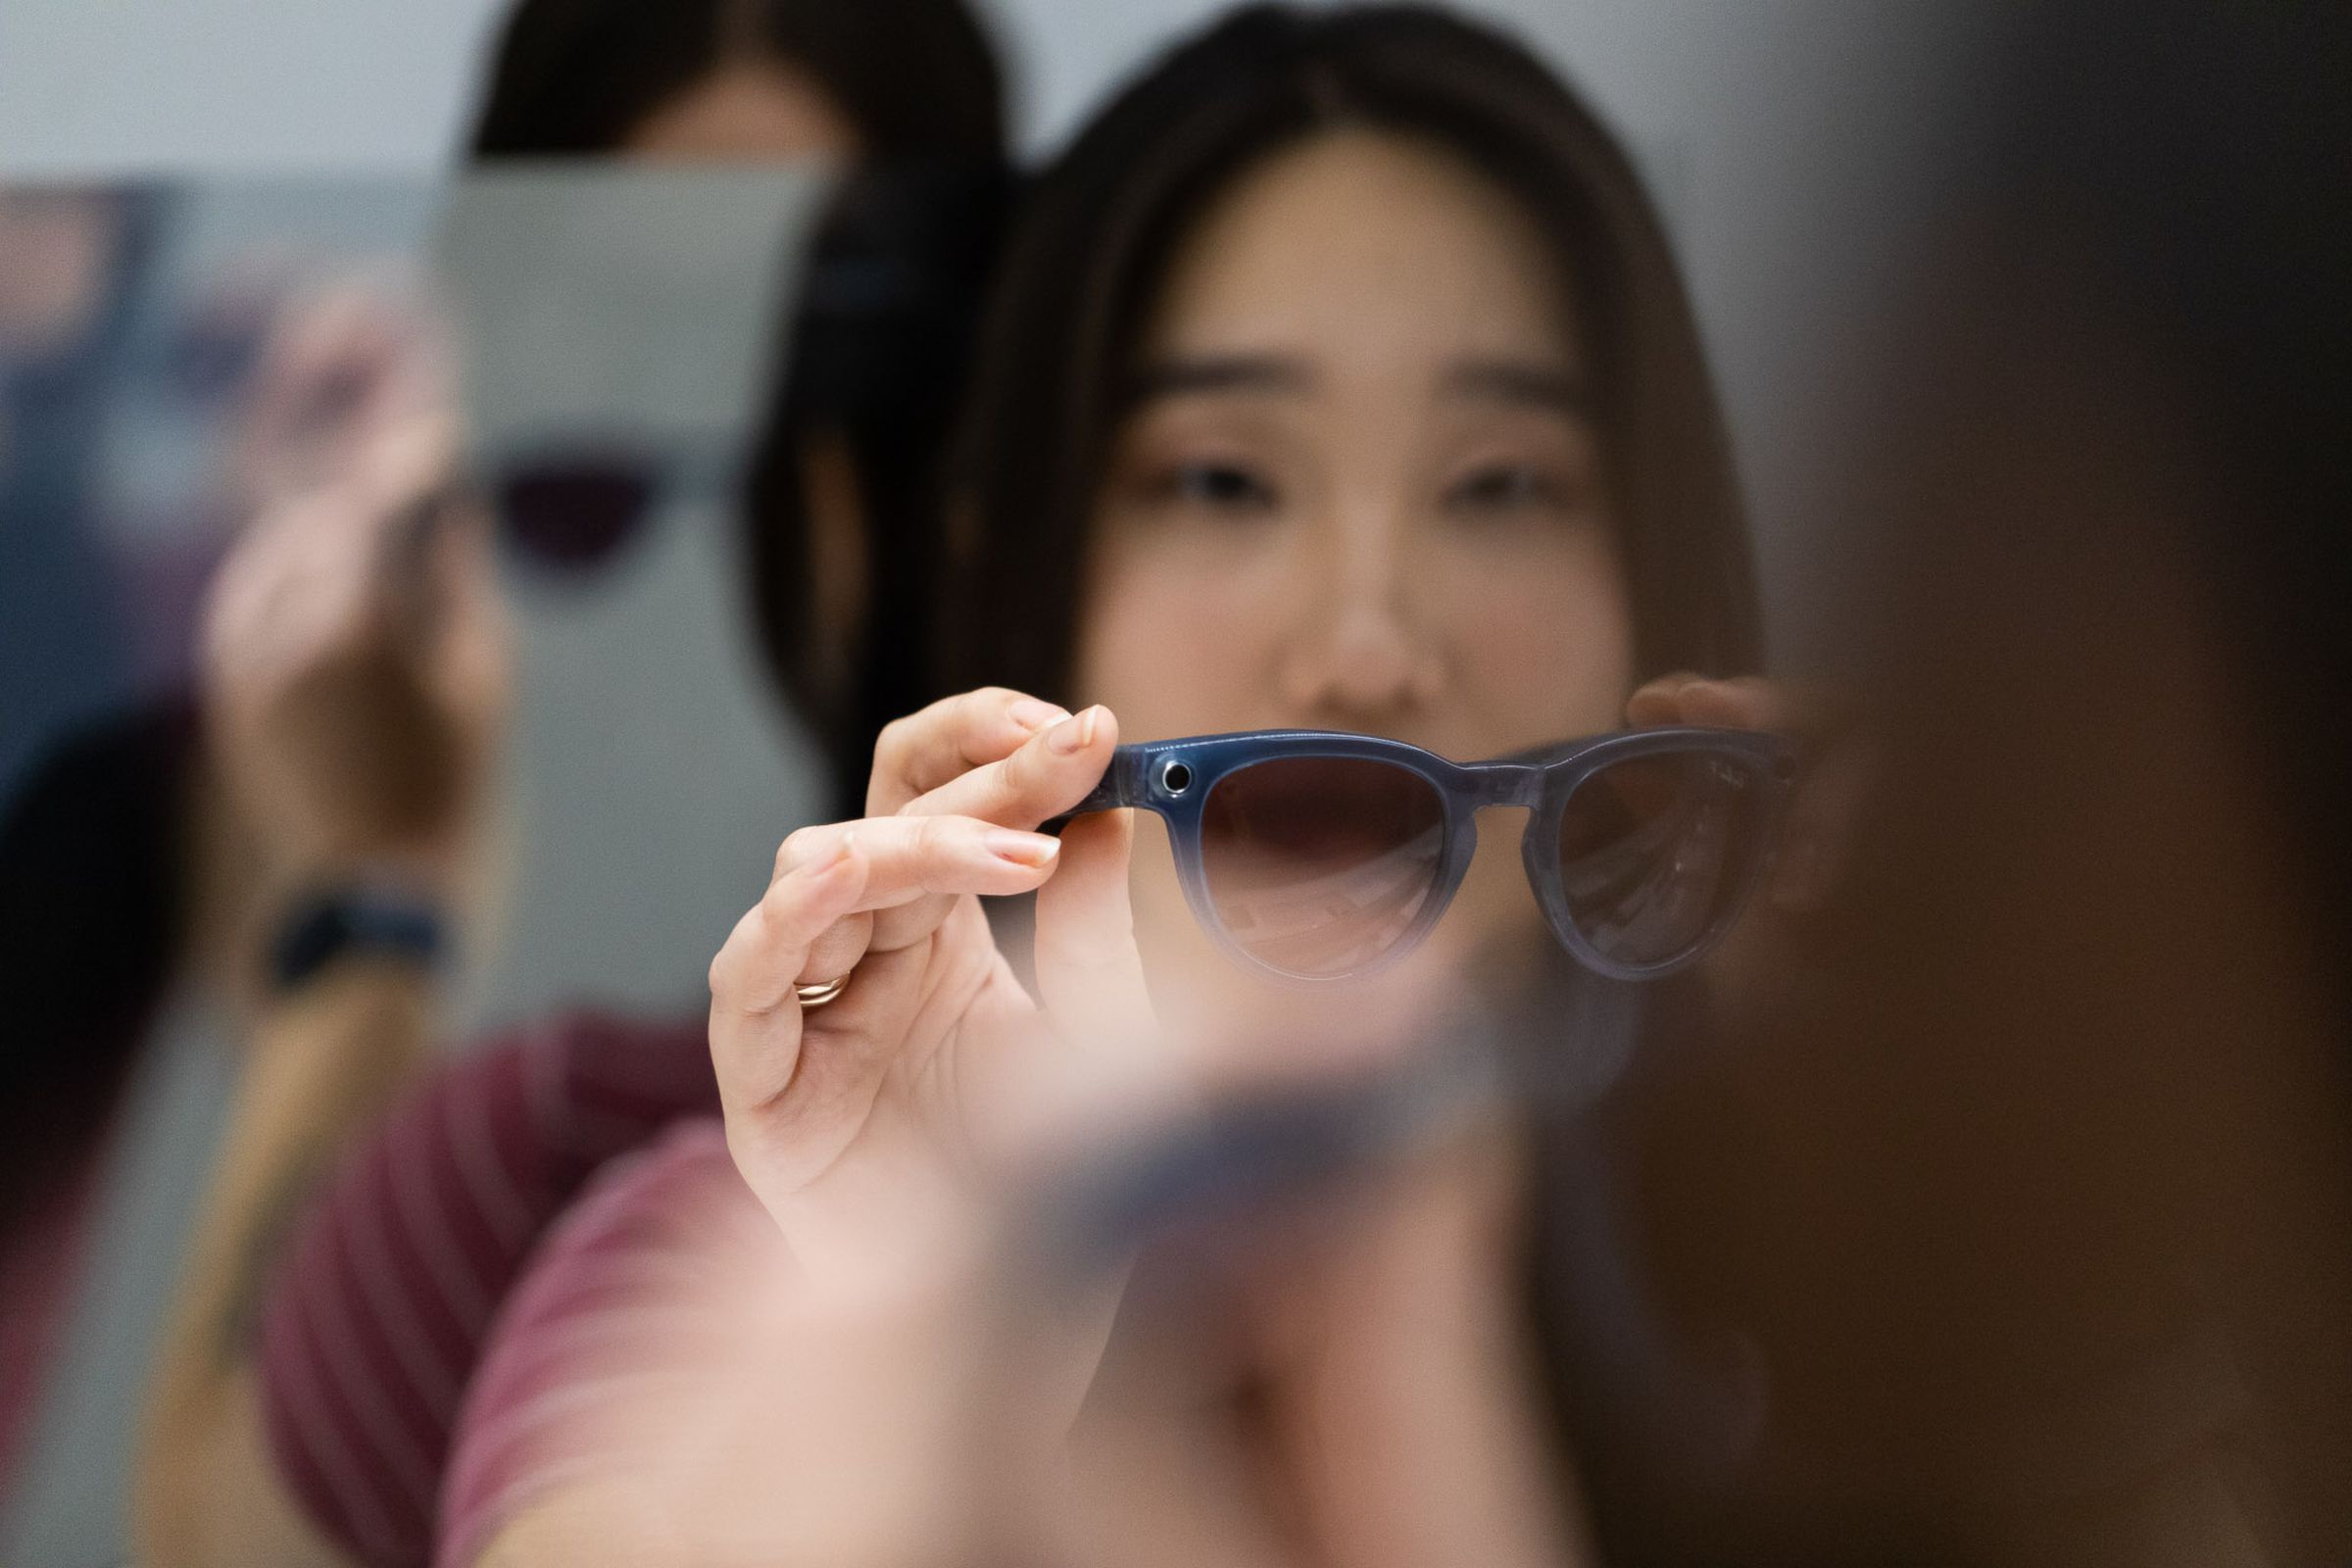 Person holding Ray-Ban Meta Smart Glasses in front of them while another person peers through a double-sided mirror in the background.